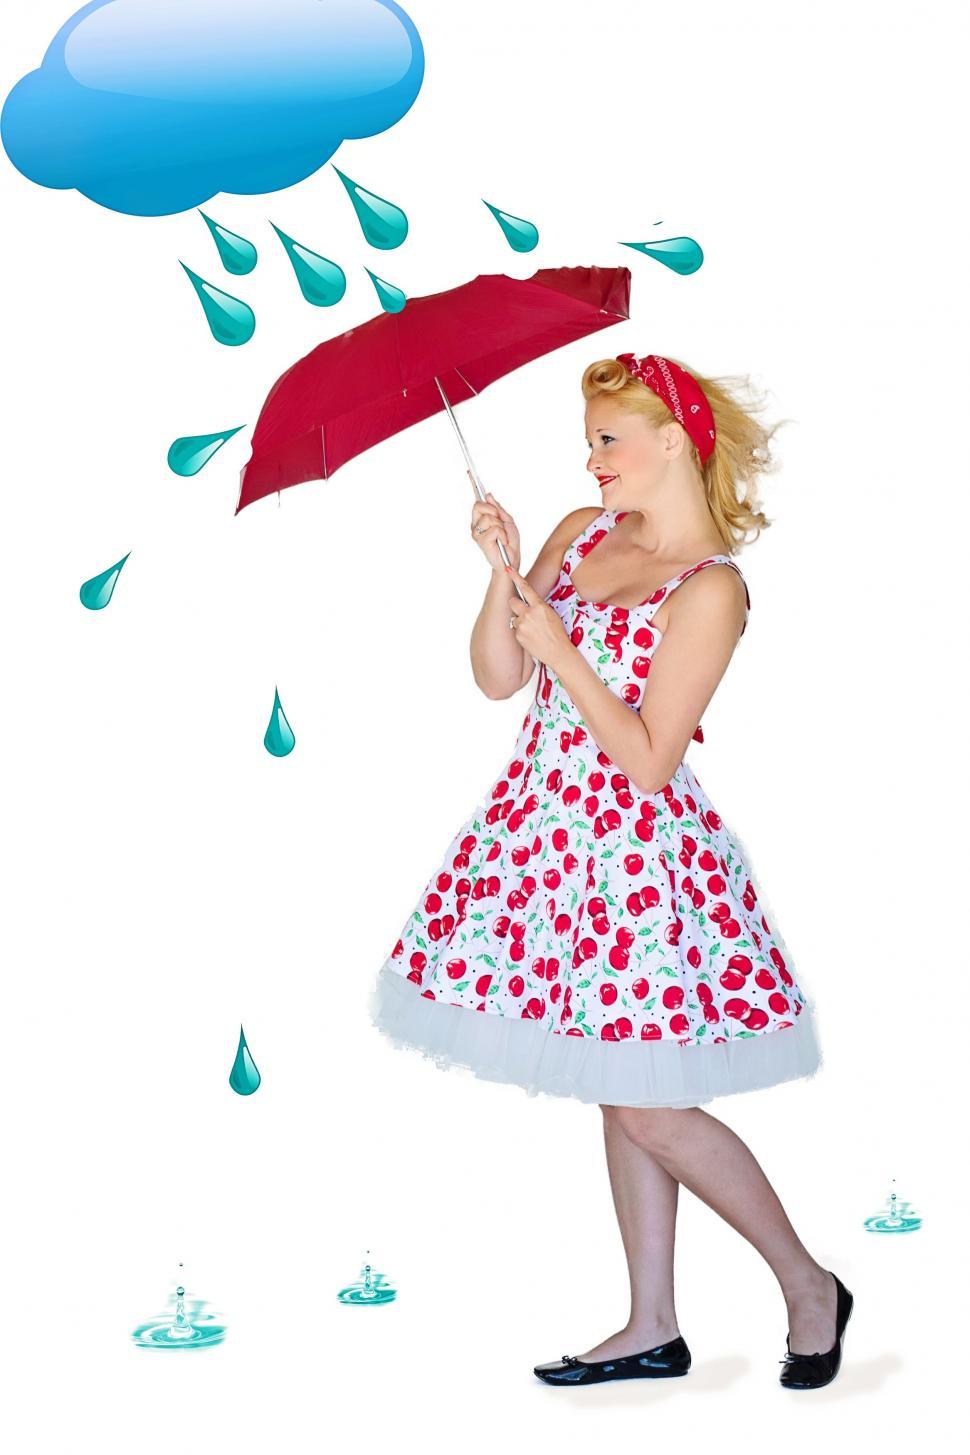 Free Image of Young Woman with Umbrella - Illustration 